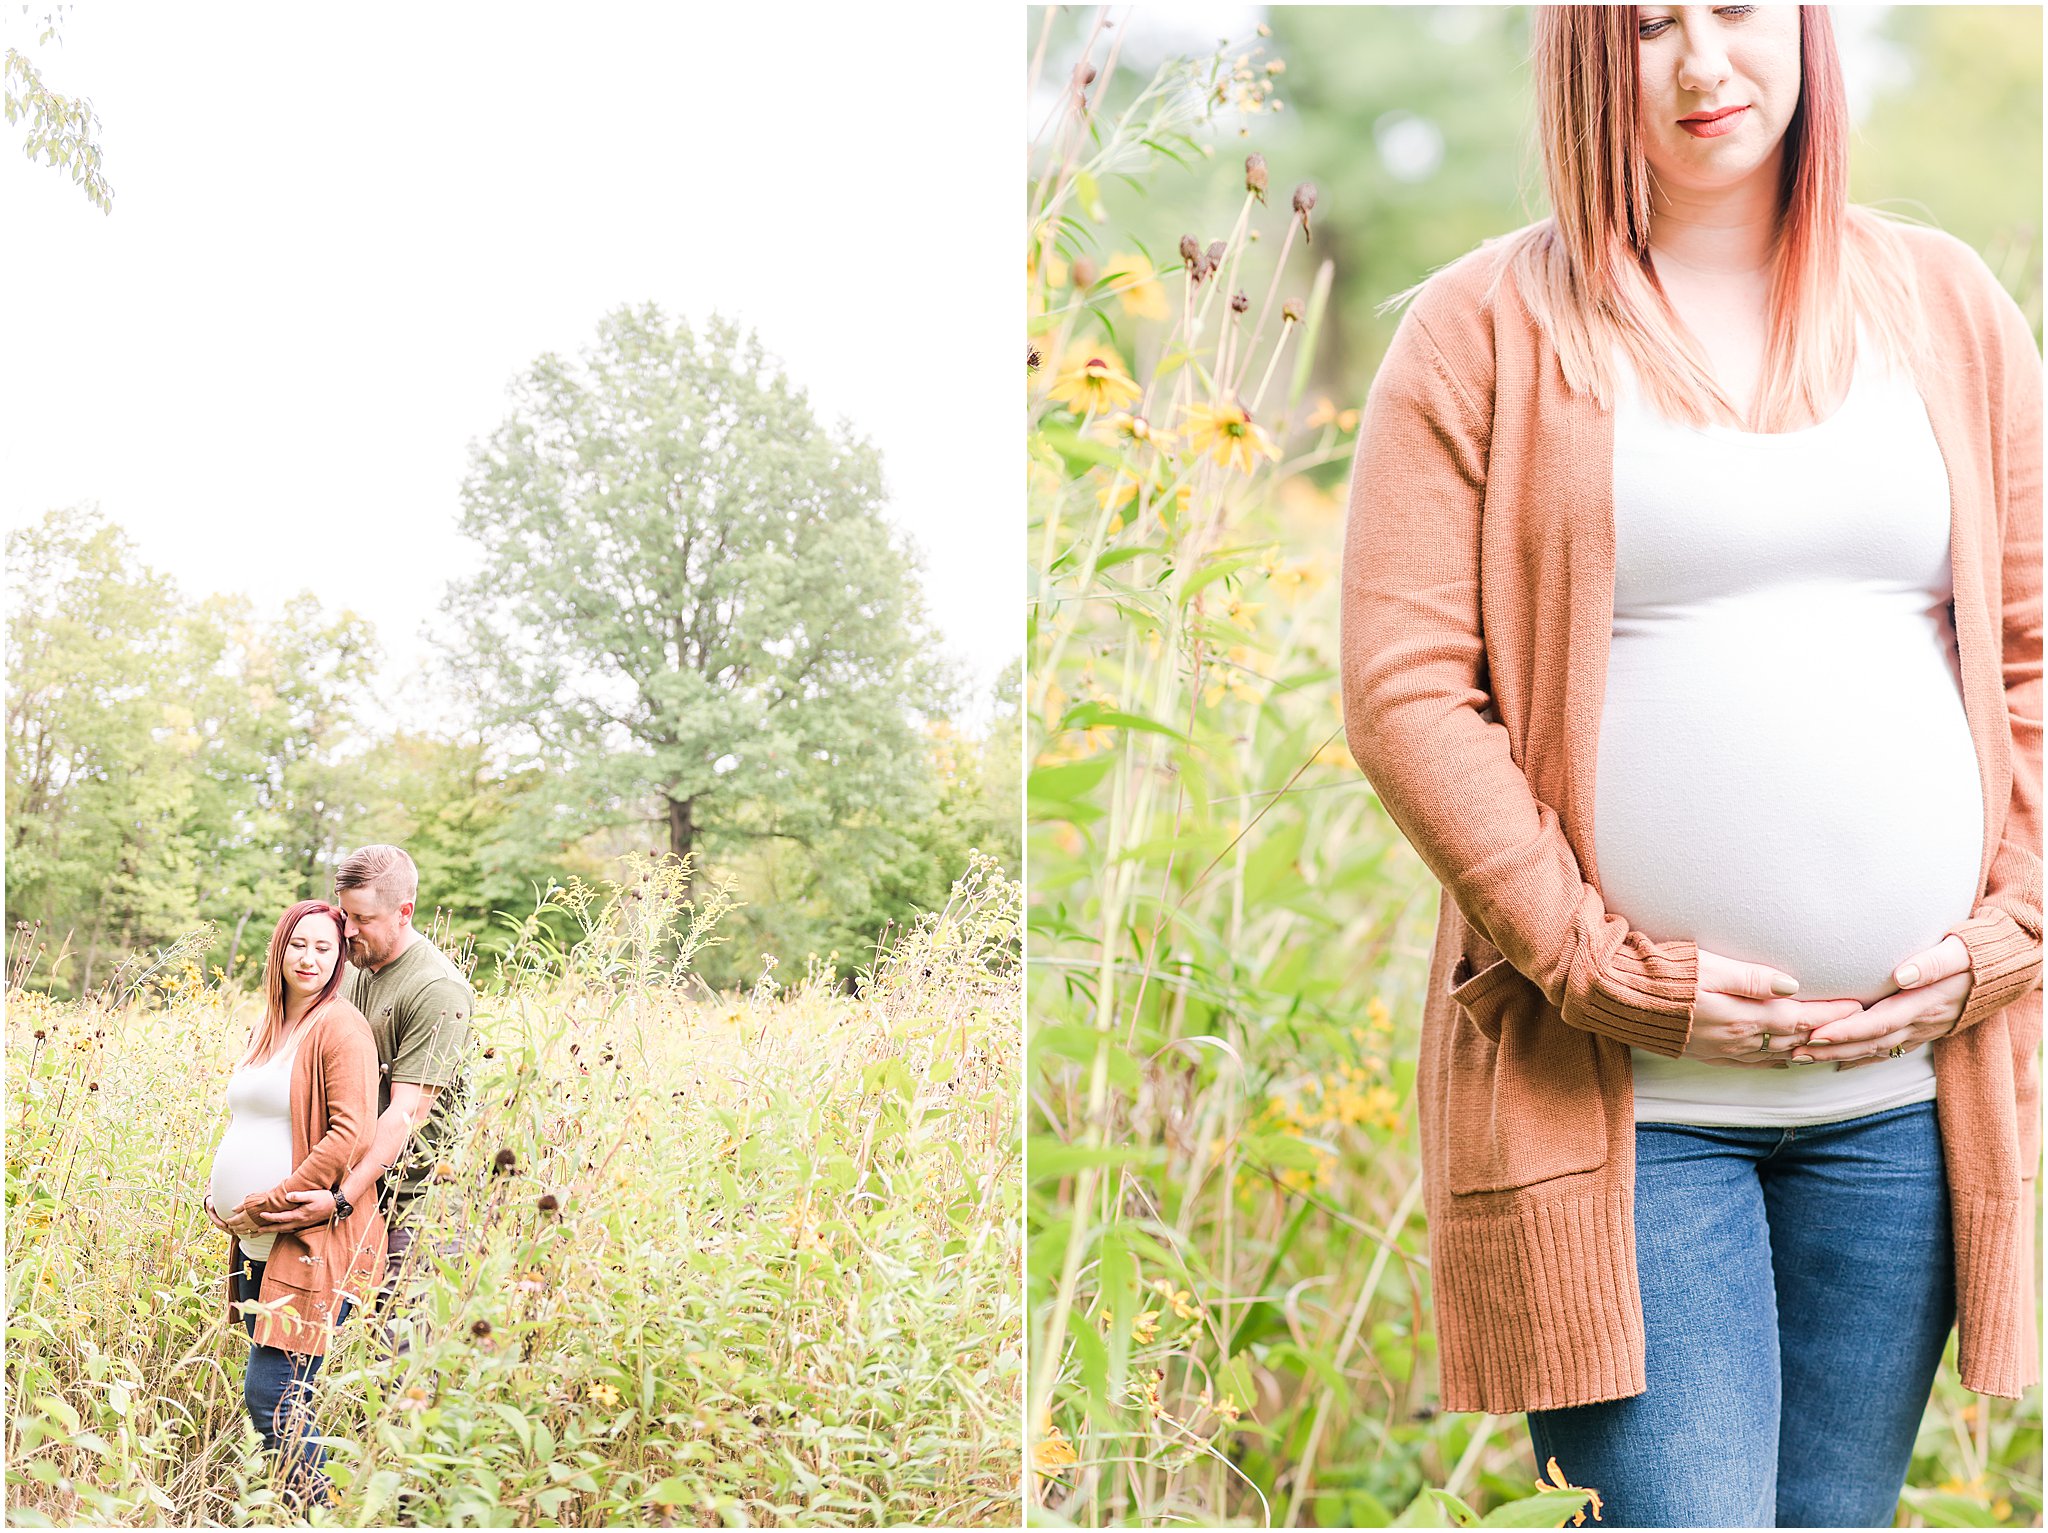 Pregnant woman holding low on belly during Eagle Creek Park maternity session